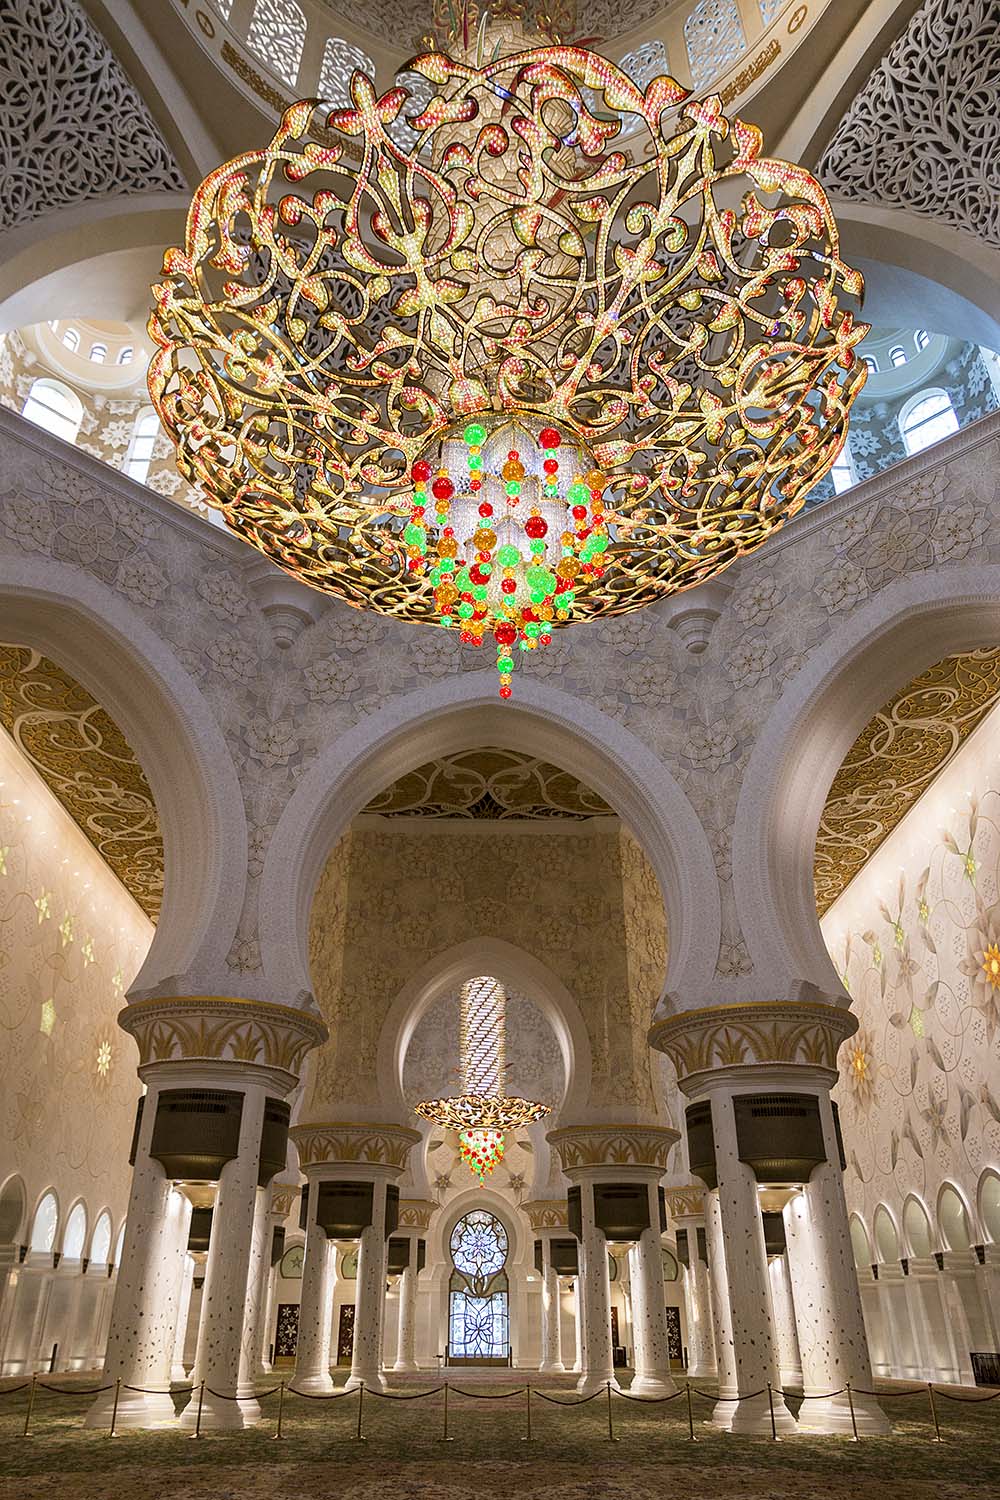 Interior of the grand mosque in Abu Dhabi